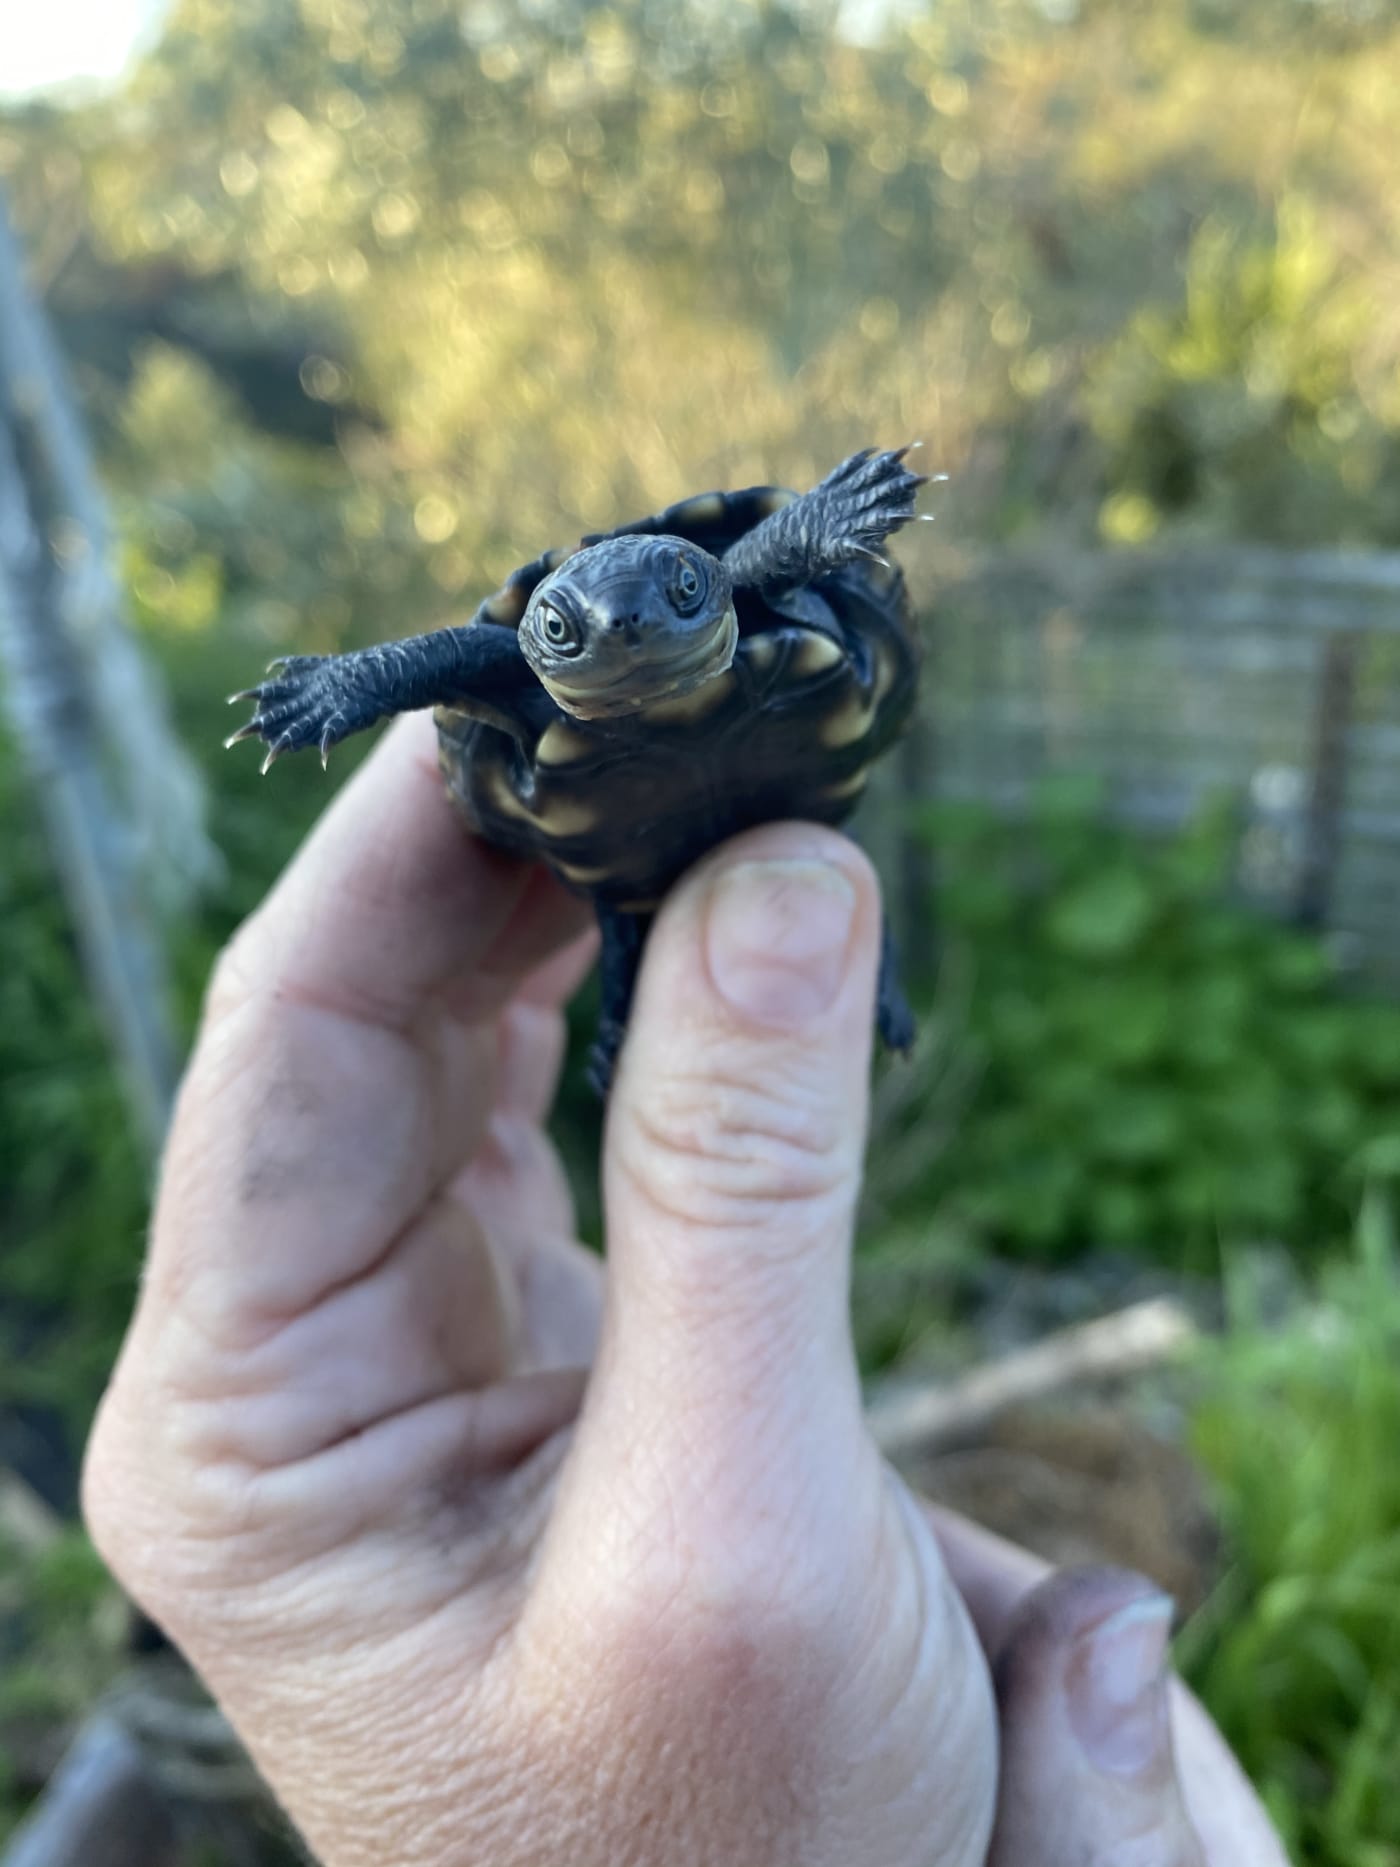 A western swamp turtle in hand